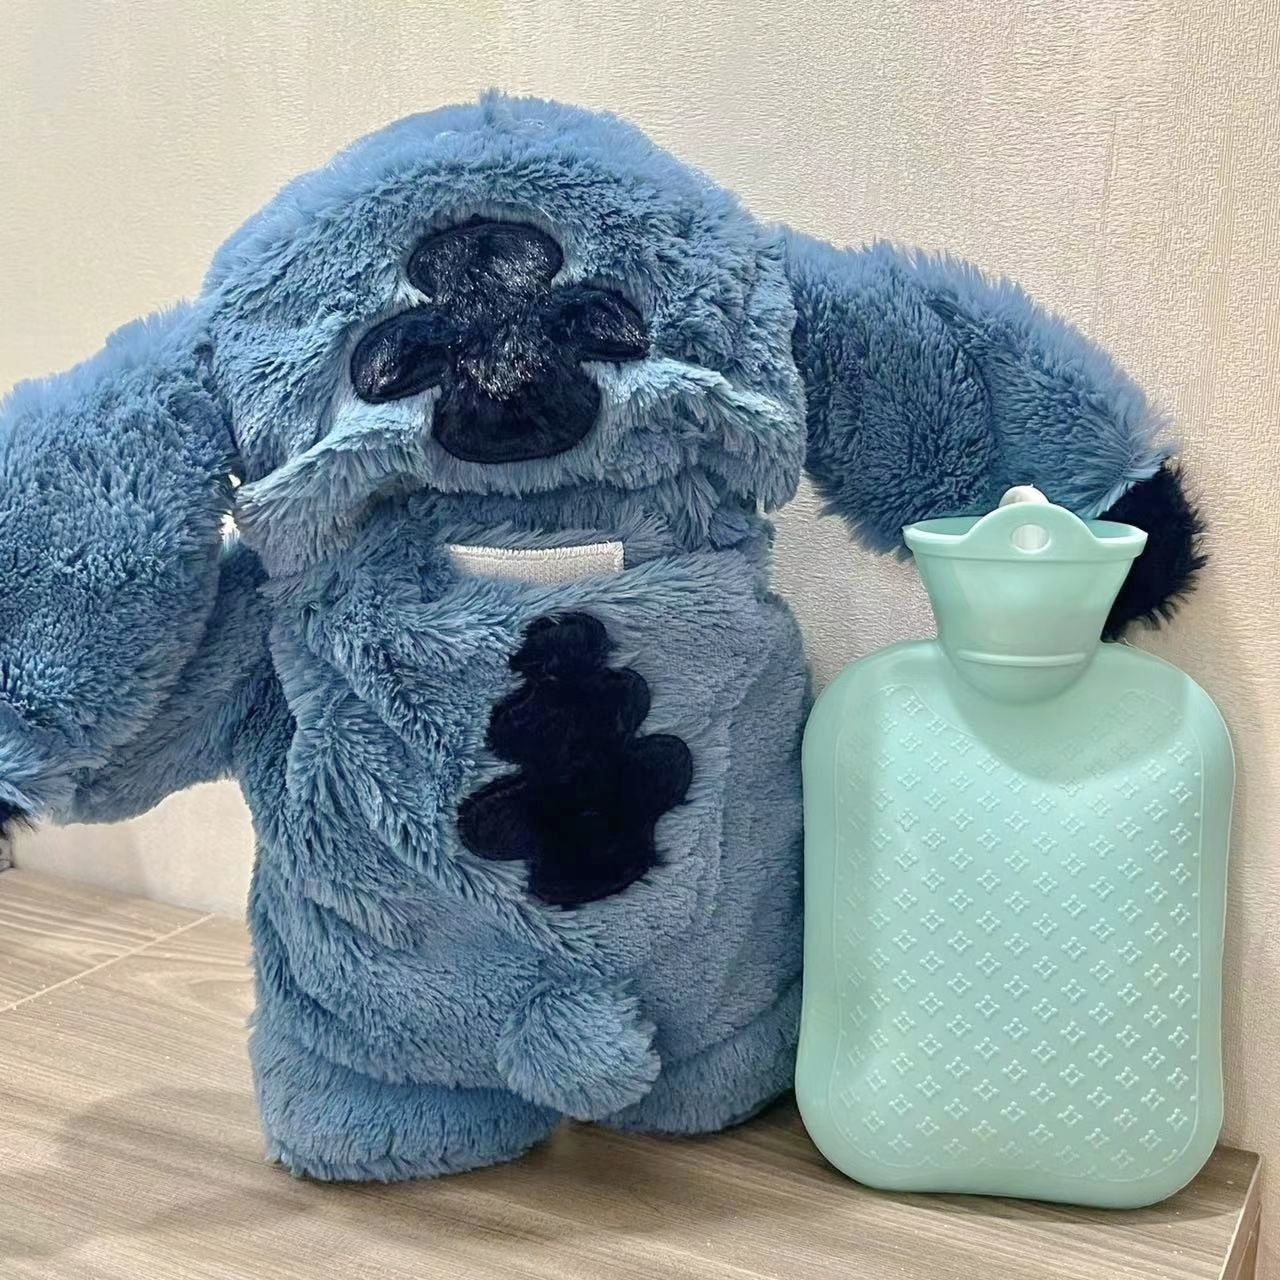 Disney Stitch Water Bottle with Sleeve